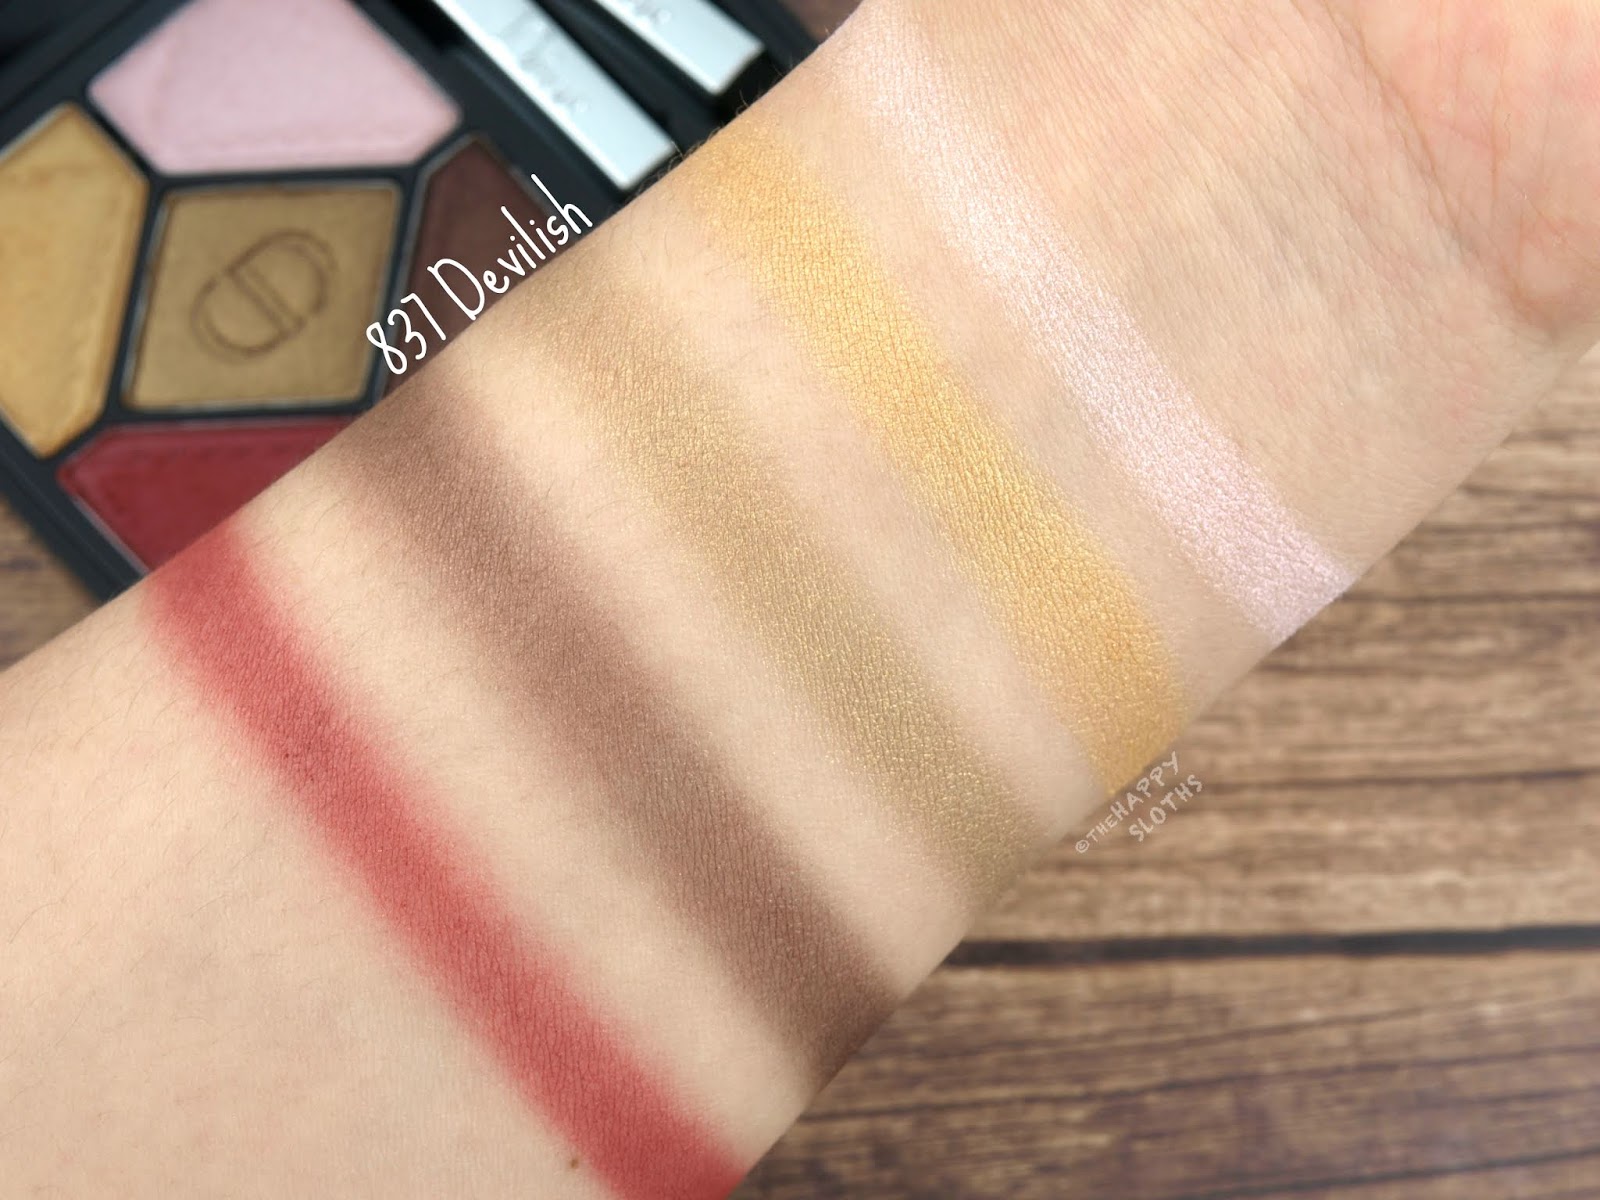 Dior Fall 2018 Dior en Diable Collection | 5 Couleurs Eyeshadow Palette in "837 Devilish": Review and Swatches